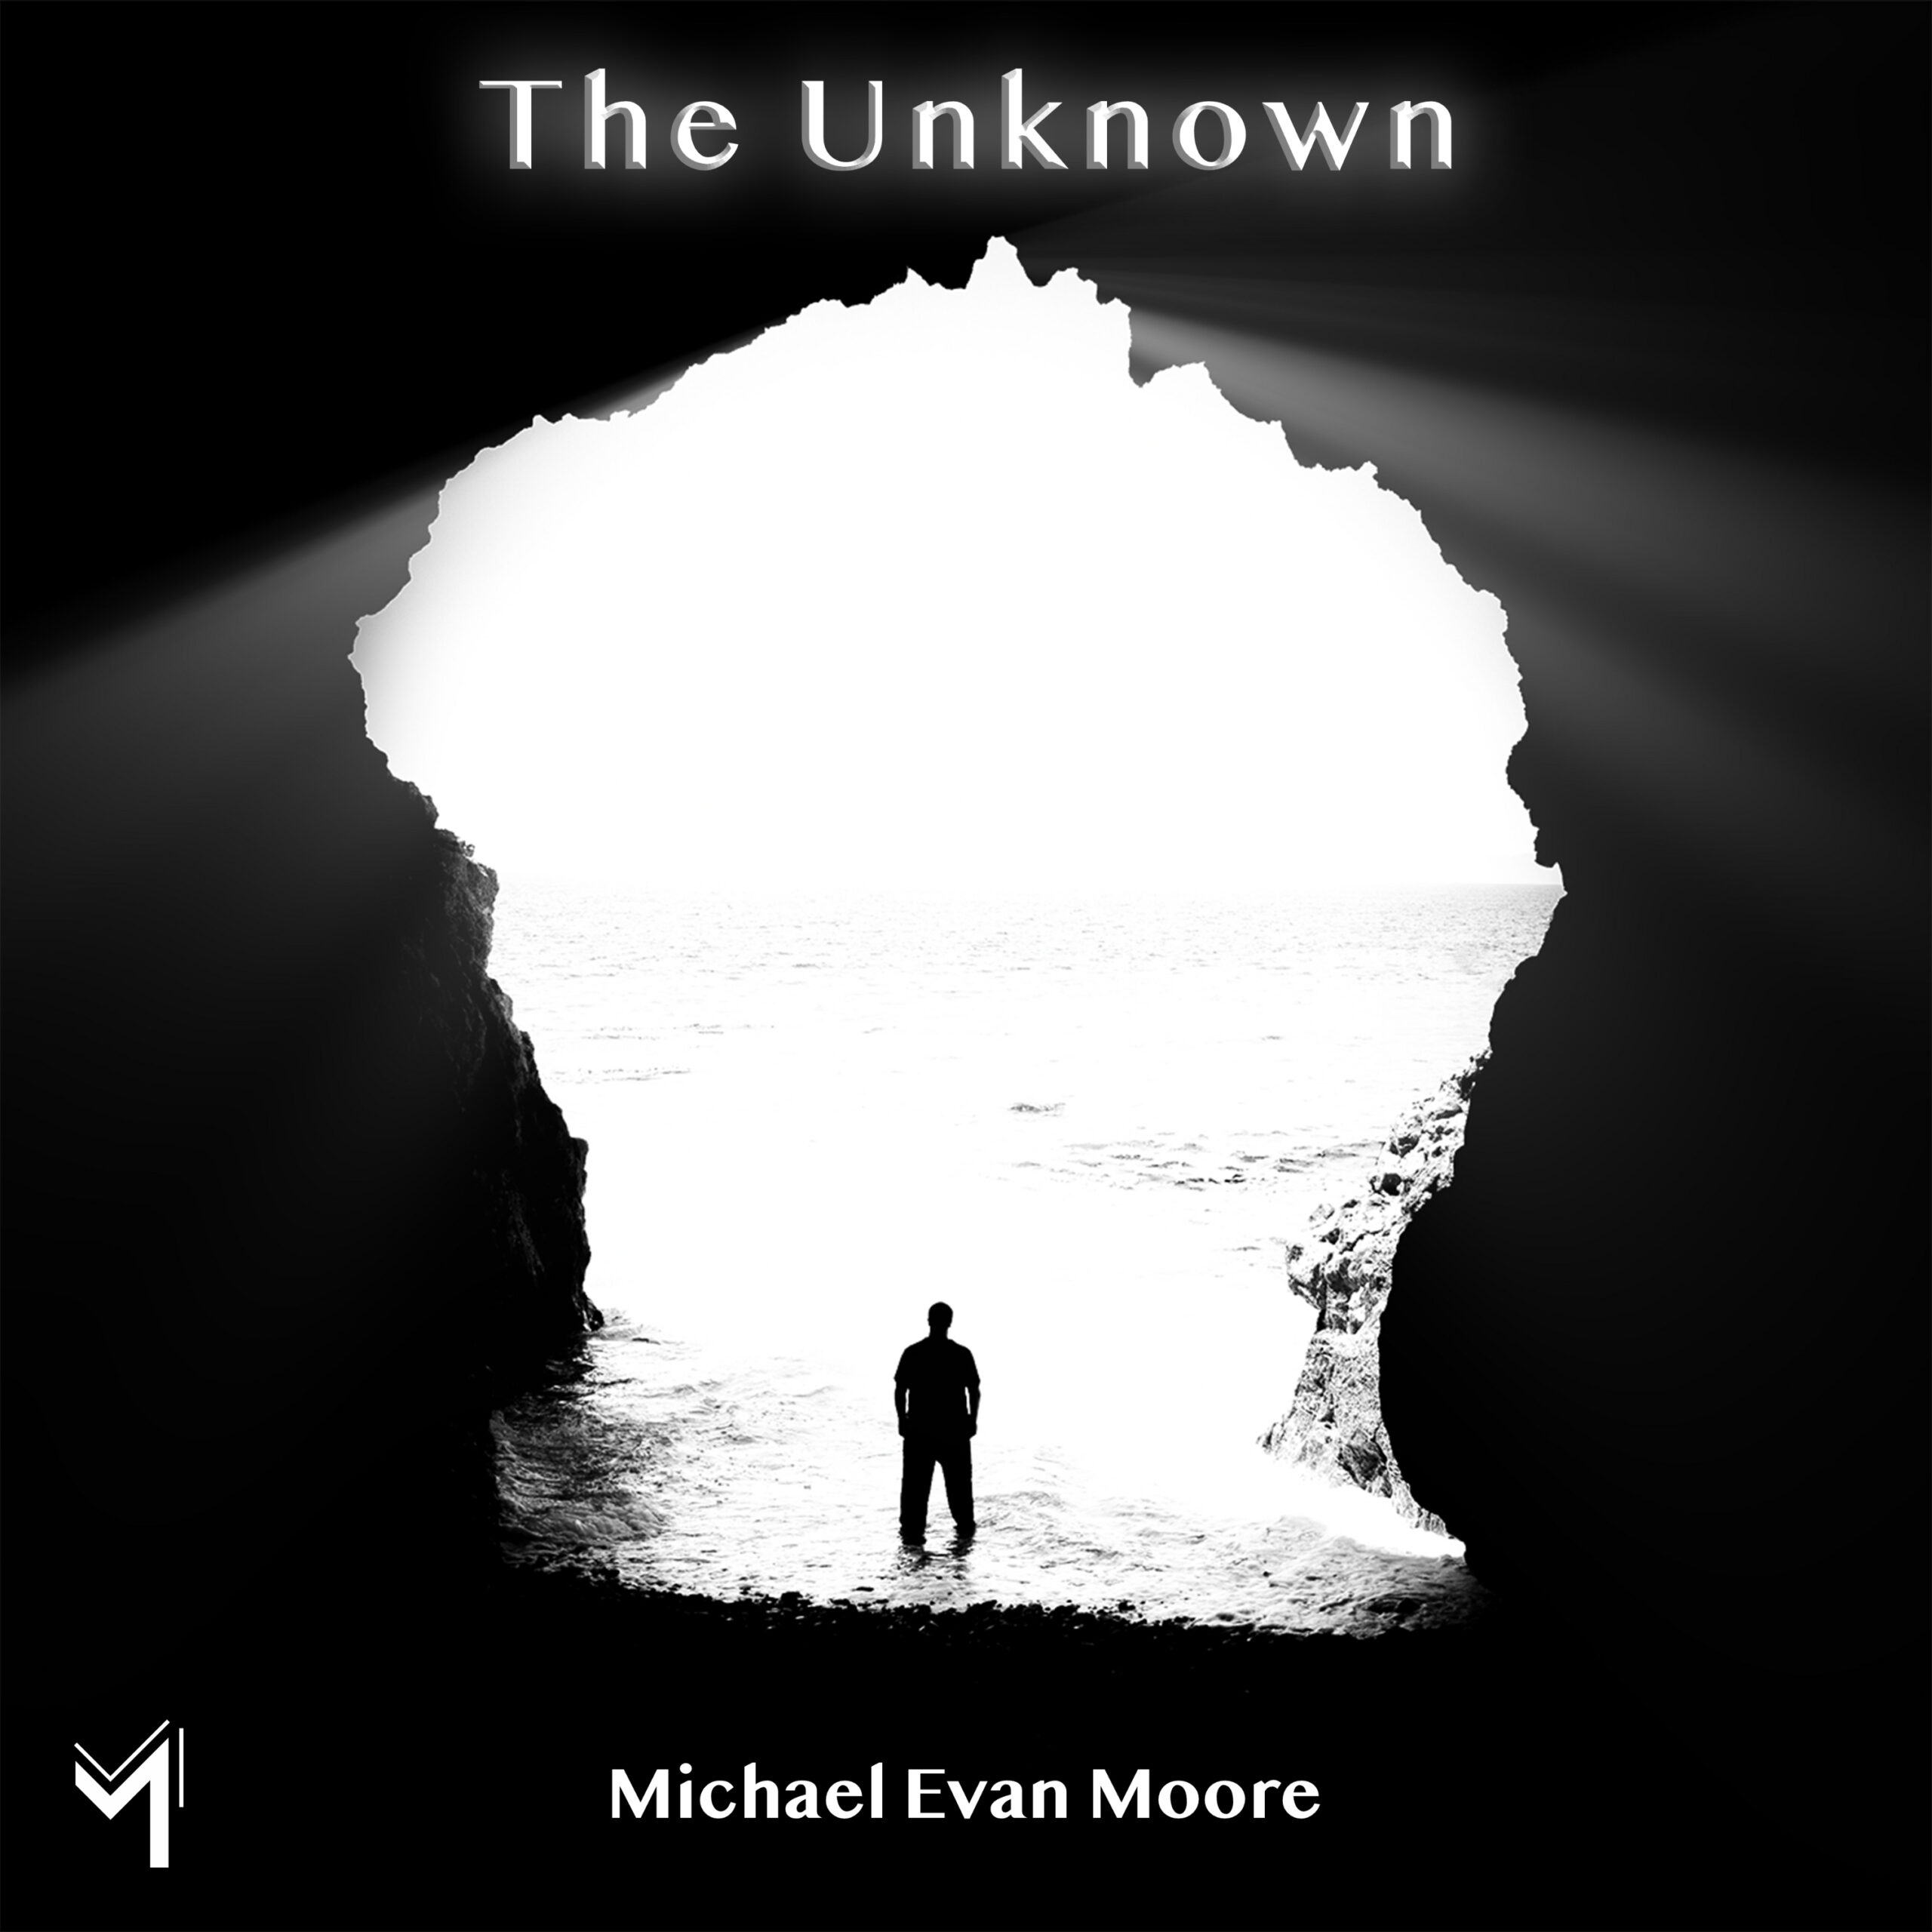 The Unknown Album Art with M Logo by Michael Evan Moore